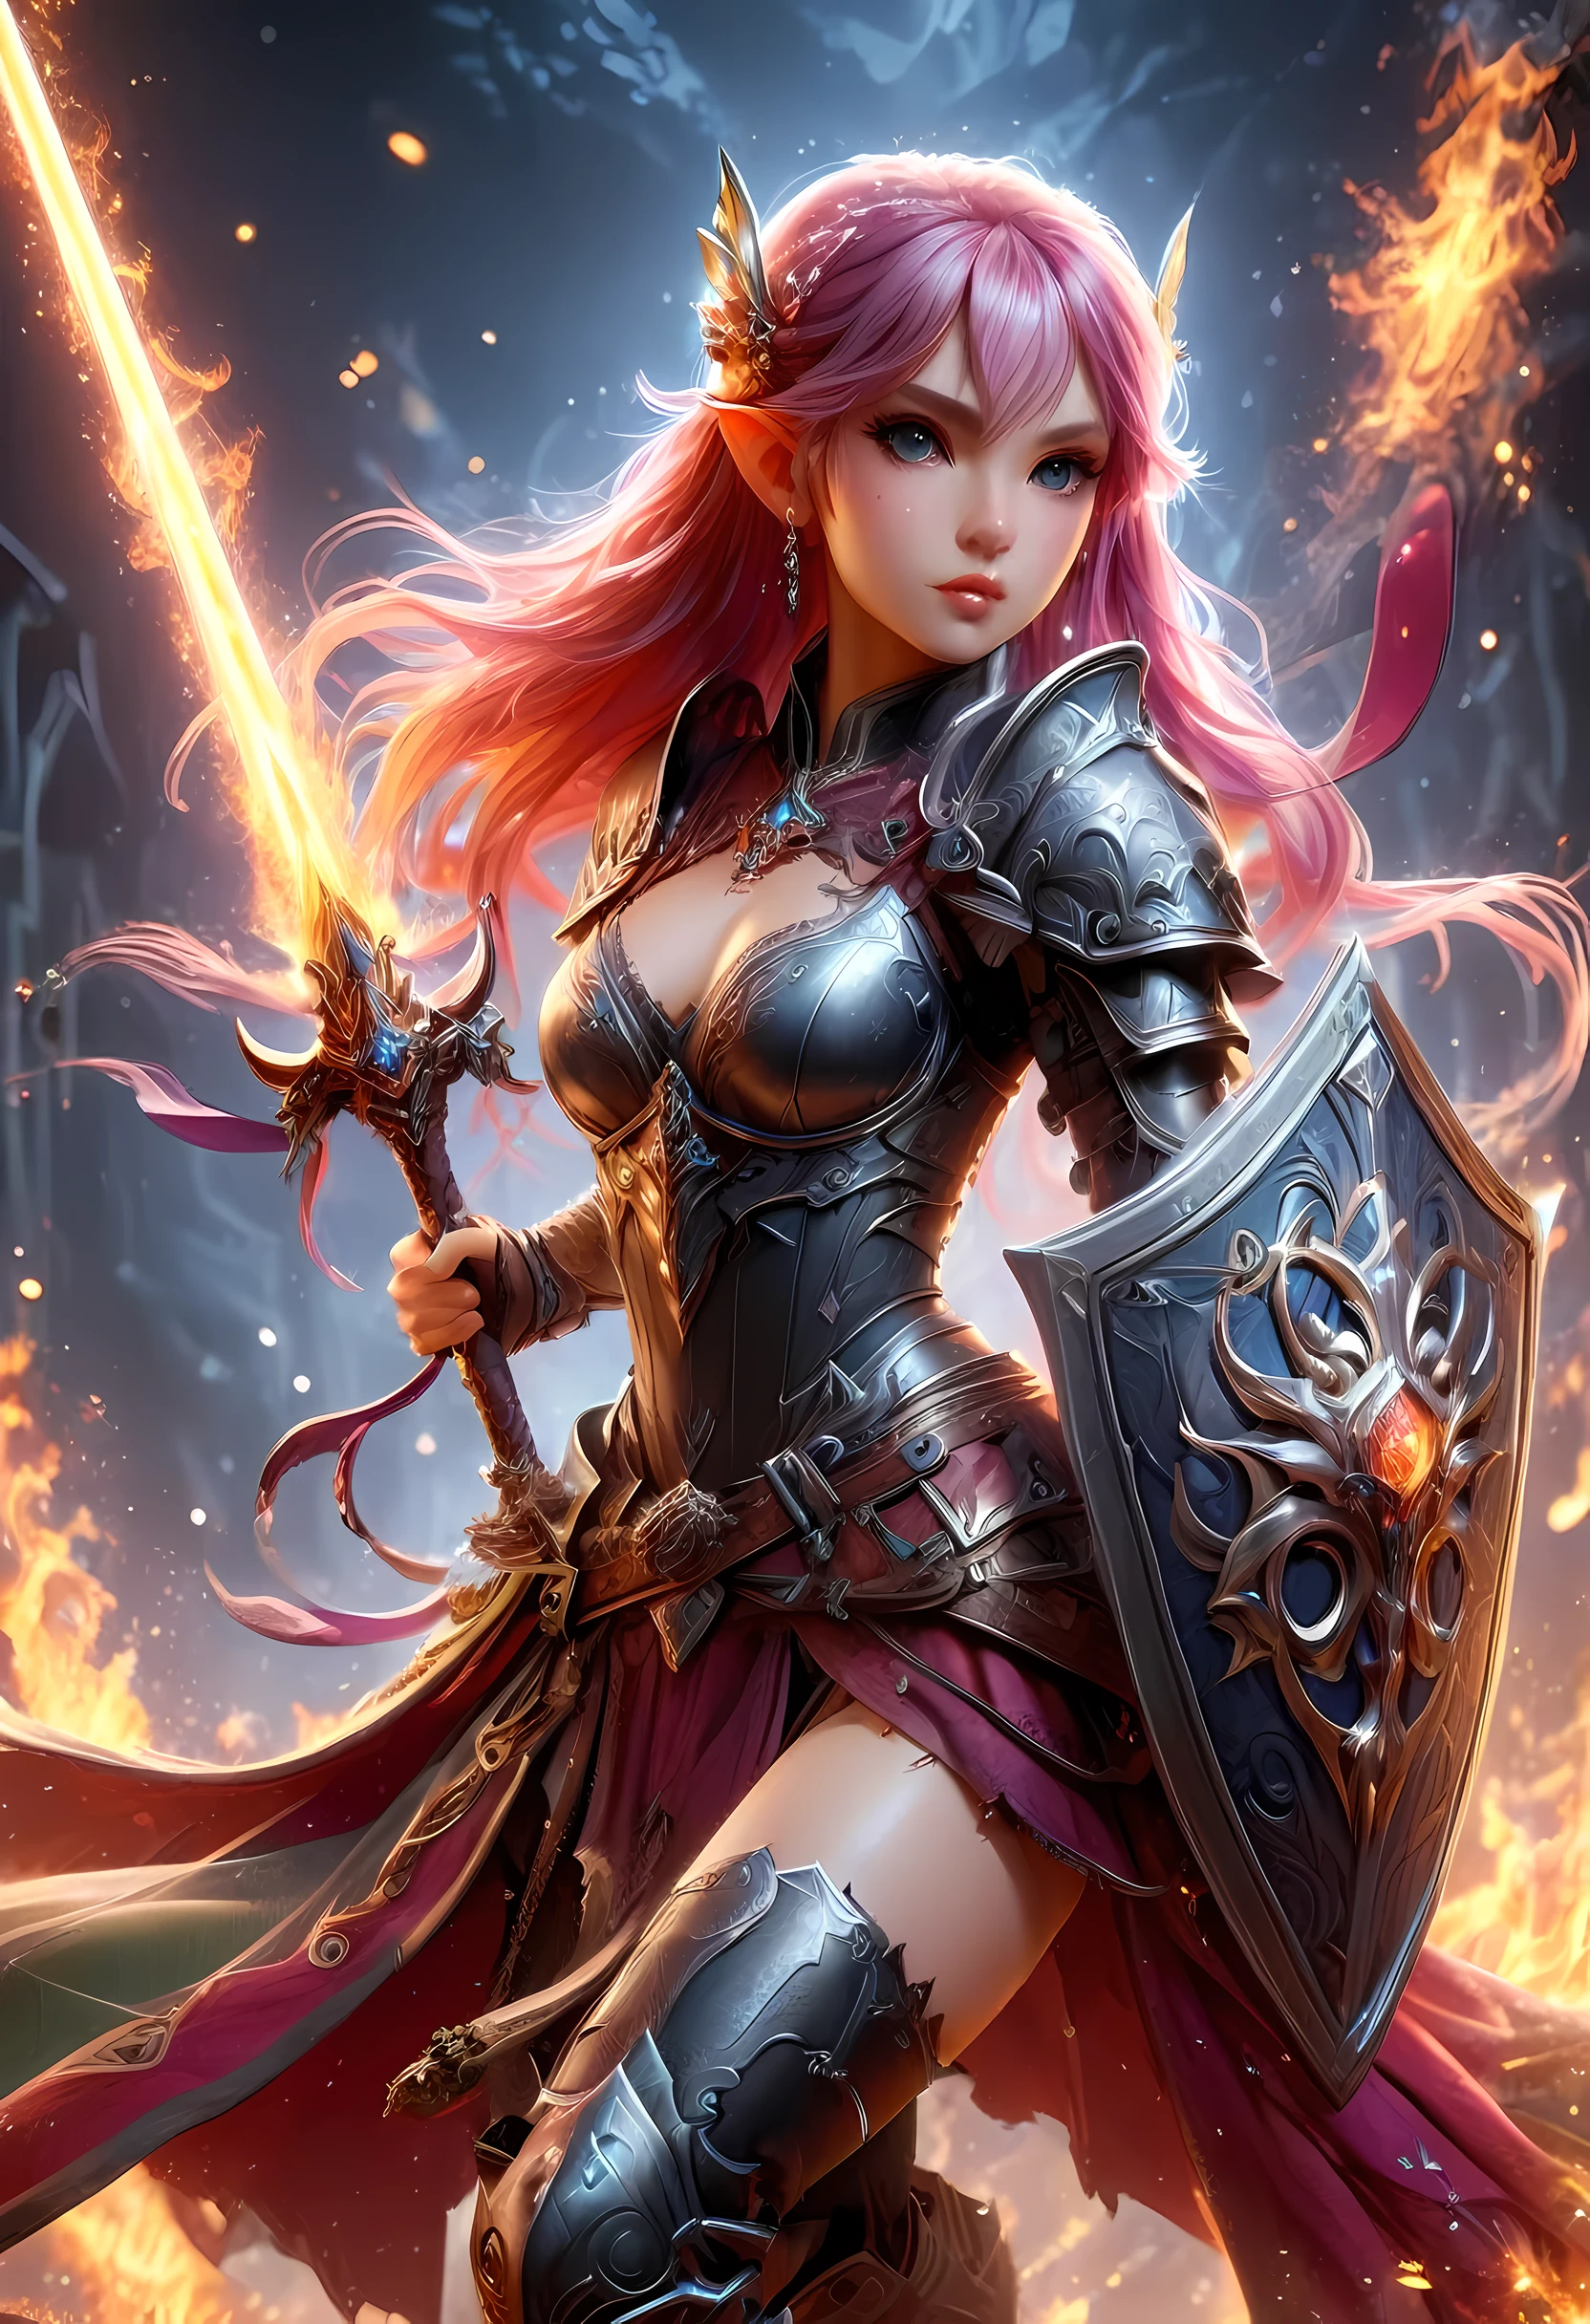 a picture of a female elf (intense details, Masterpiece, best quality: 1.5) fantasy swashbuckler, fantasy fencer, armed with a slim sword, shinning sword, metallic shine, colorful clothes, dynamic clothing, an ultra wide shot, full body (intense details, Masterpiece, best quality: 1.5)epic beautiful female elf (intense details, Masterpiece, best quality: 1.5), rich hair, braided hair, small pointed ears, GlowingRunes_pink [colorful magical sigils in the air],[ colorful arcane markings floating] (intricate details, Masterpiece, best quality: 1.6), holding a [sword] (intricate details, Masterpiece, best quality: 1.6) holding a [sword glowing in red light]fantasy urban street (intense details, Masterpiece, best quality: 1.5),  purple cloak, long cloak (intense details, Masterpiece, best quality: 1.5), sense of daring, sense of adventure,  high details, best quality, 8k, [ultra detailed], masterpiece, best quality, (extremely detailed), dynamic angle, ultra wide shot, photorealistic, RAW, fantasy art, dnd art,fantasy art, realistic art, faize, Sword and shield